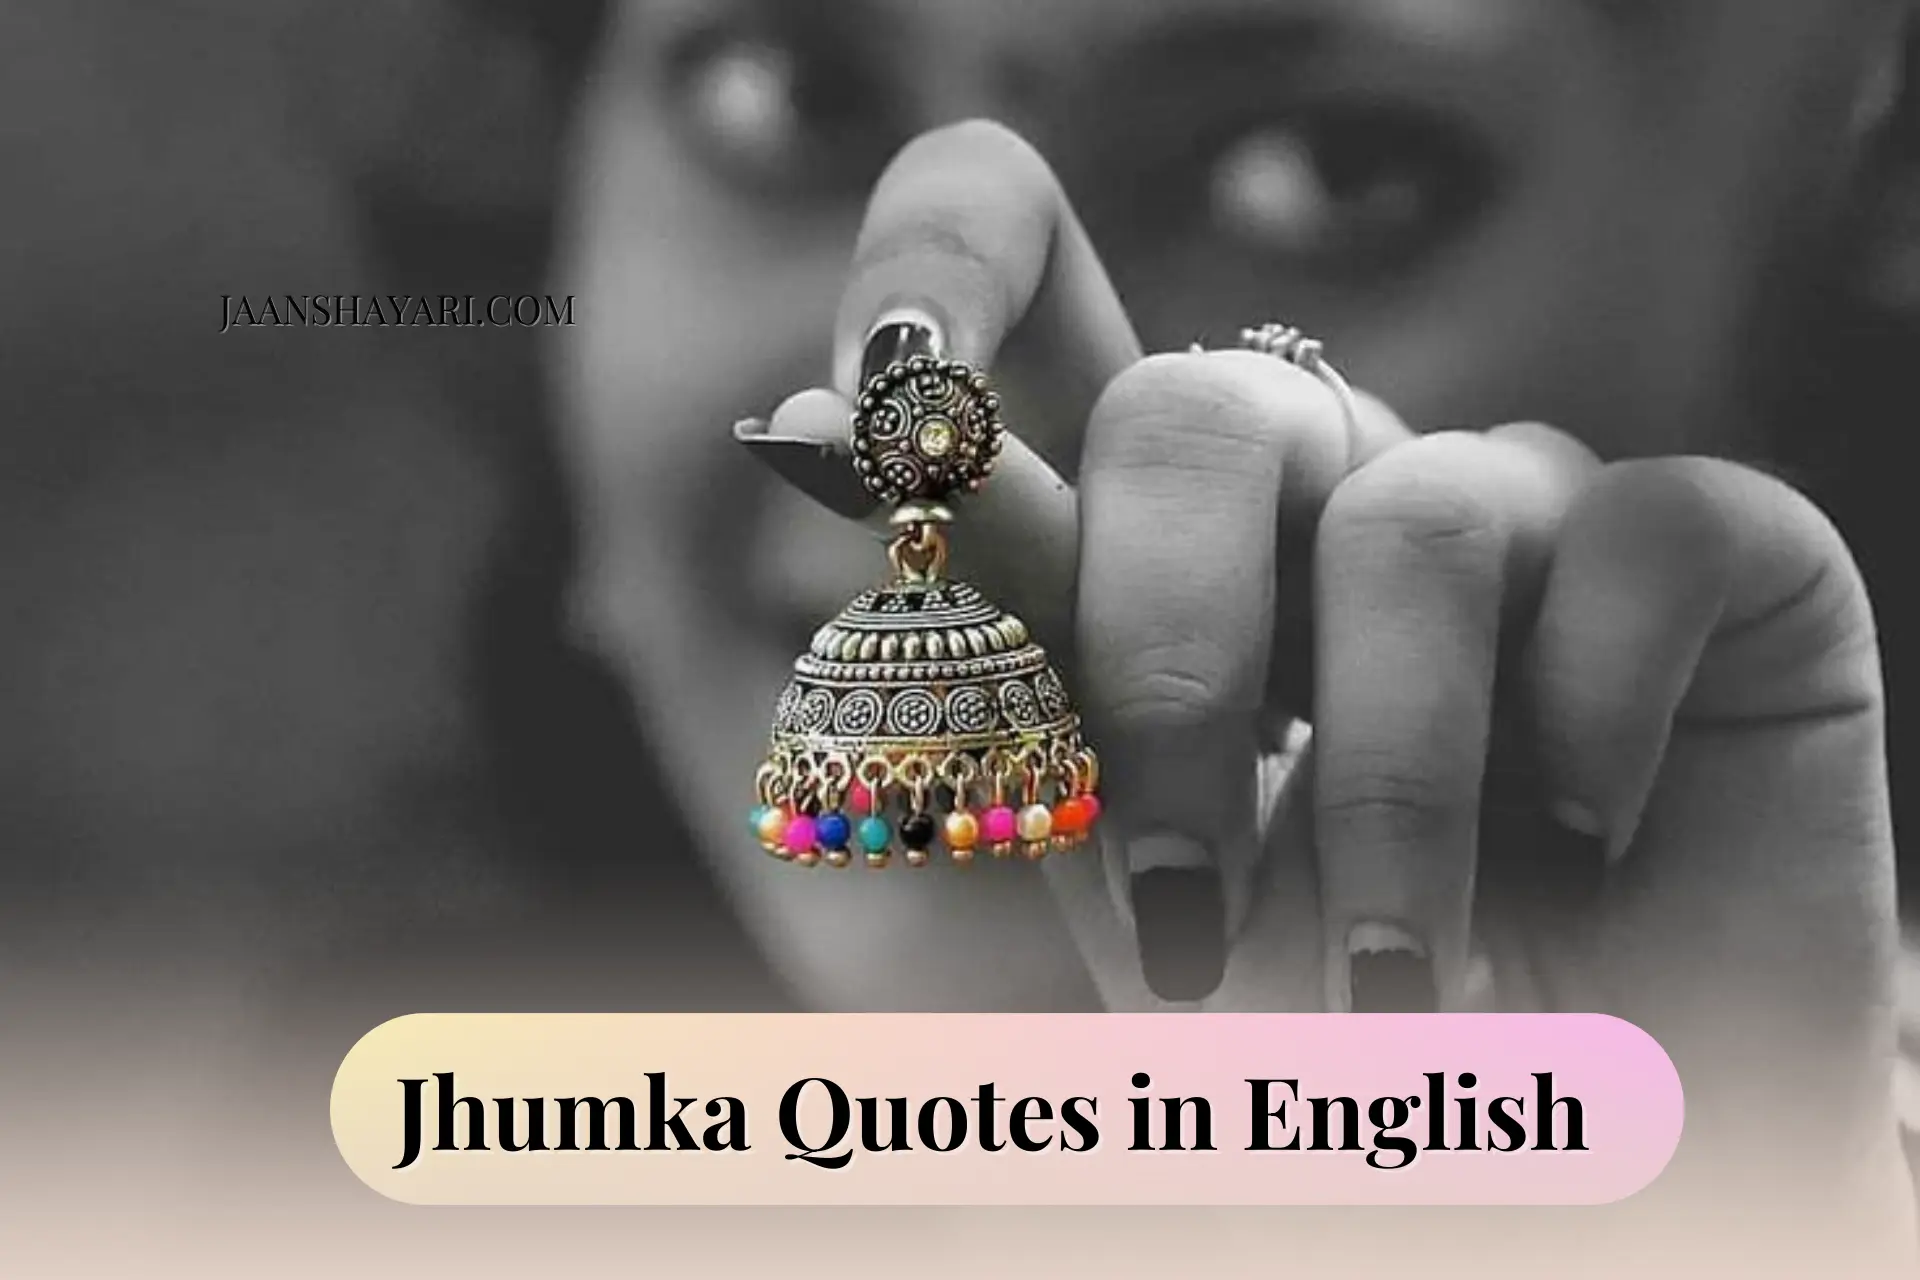 Buy YUGVEER CREATION Traditional Silver Oxidised Hindi Font Musafir Earrings  With Vintage Bohemian Fancy Stylish Earring For Women And Girls at Amazon.in